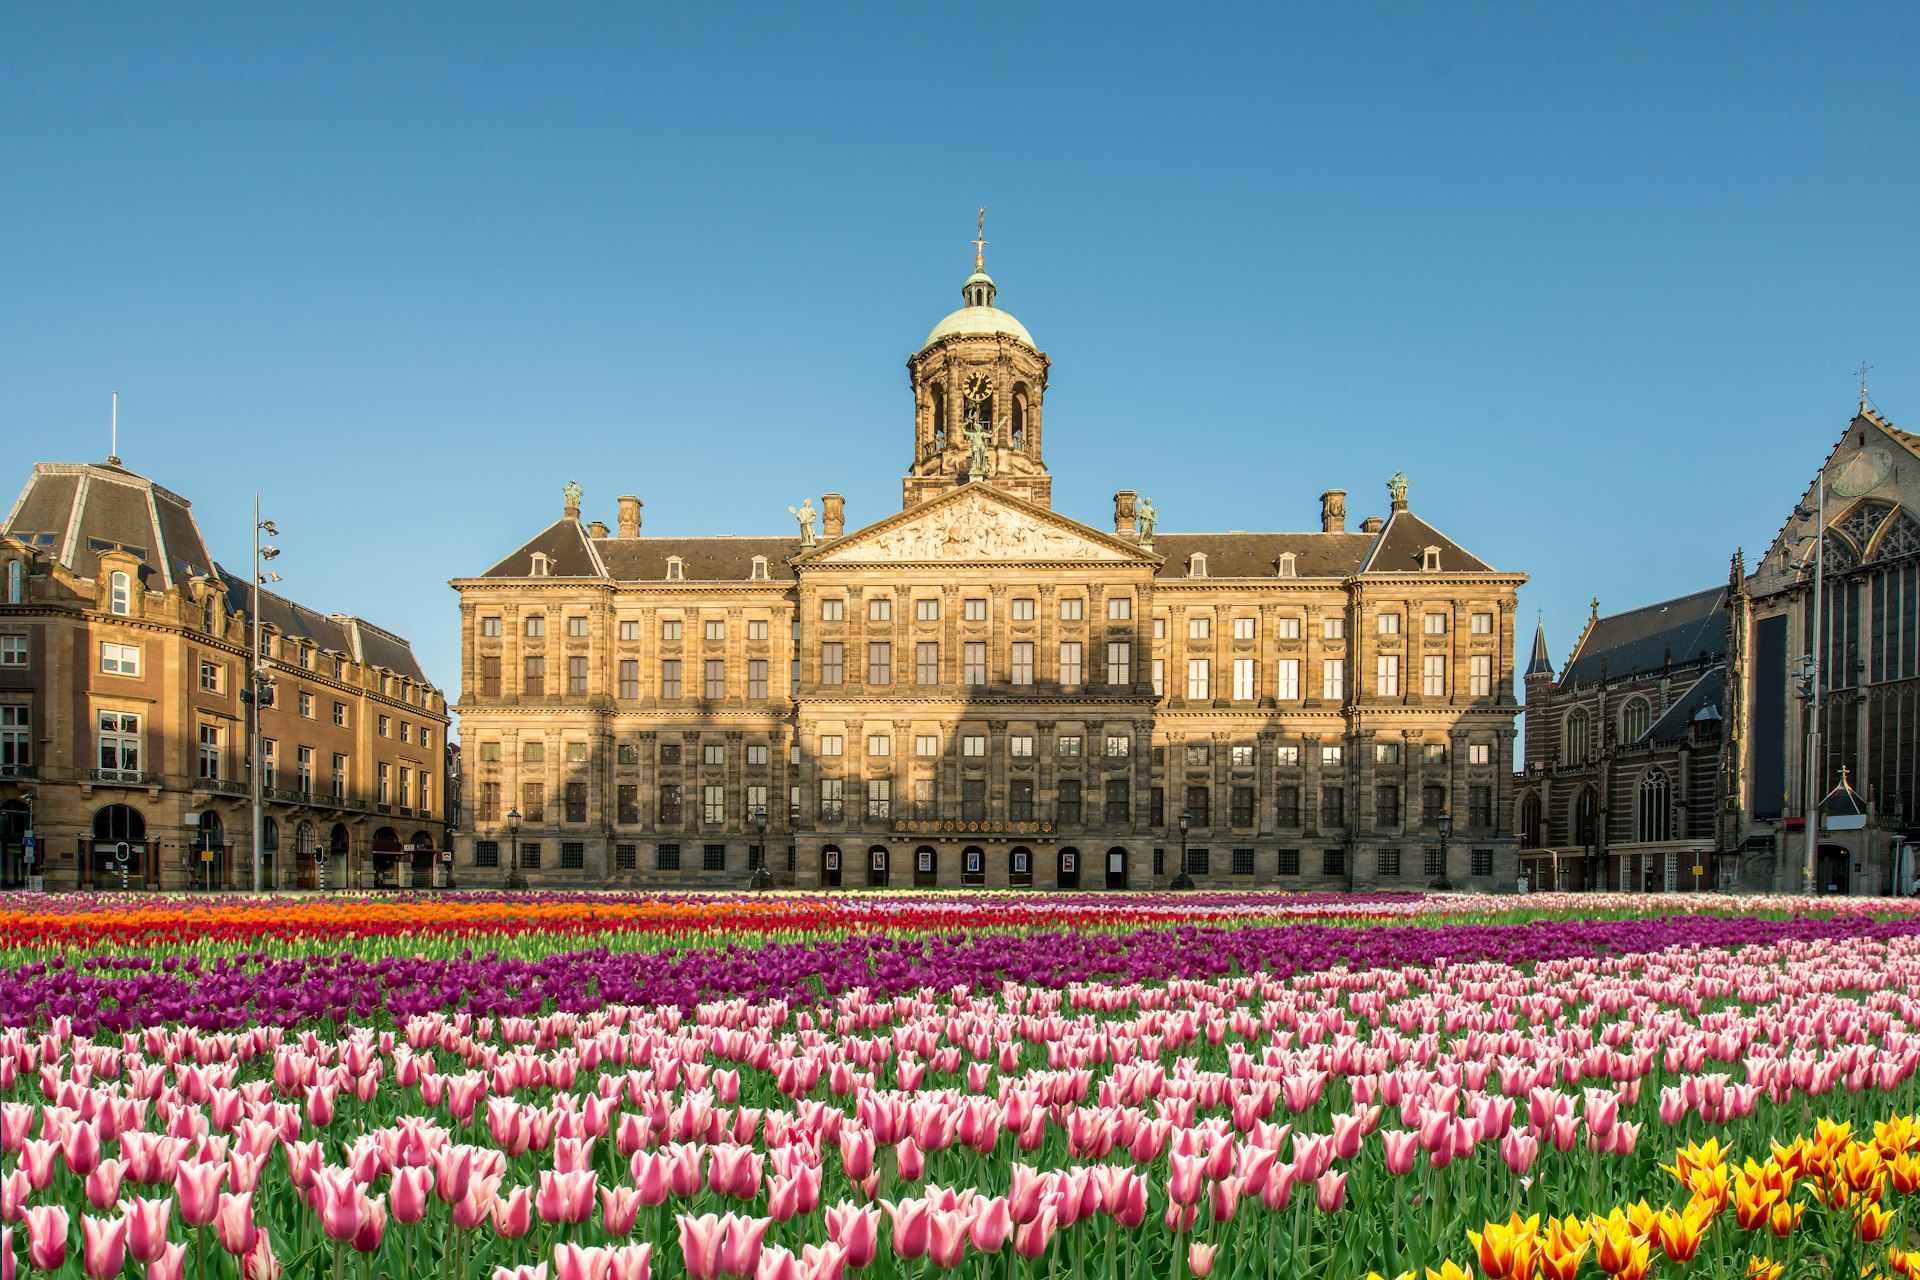 A tulip-filled open space in front of a huge palace building